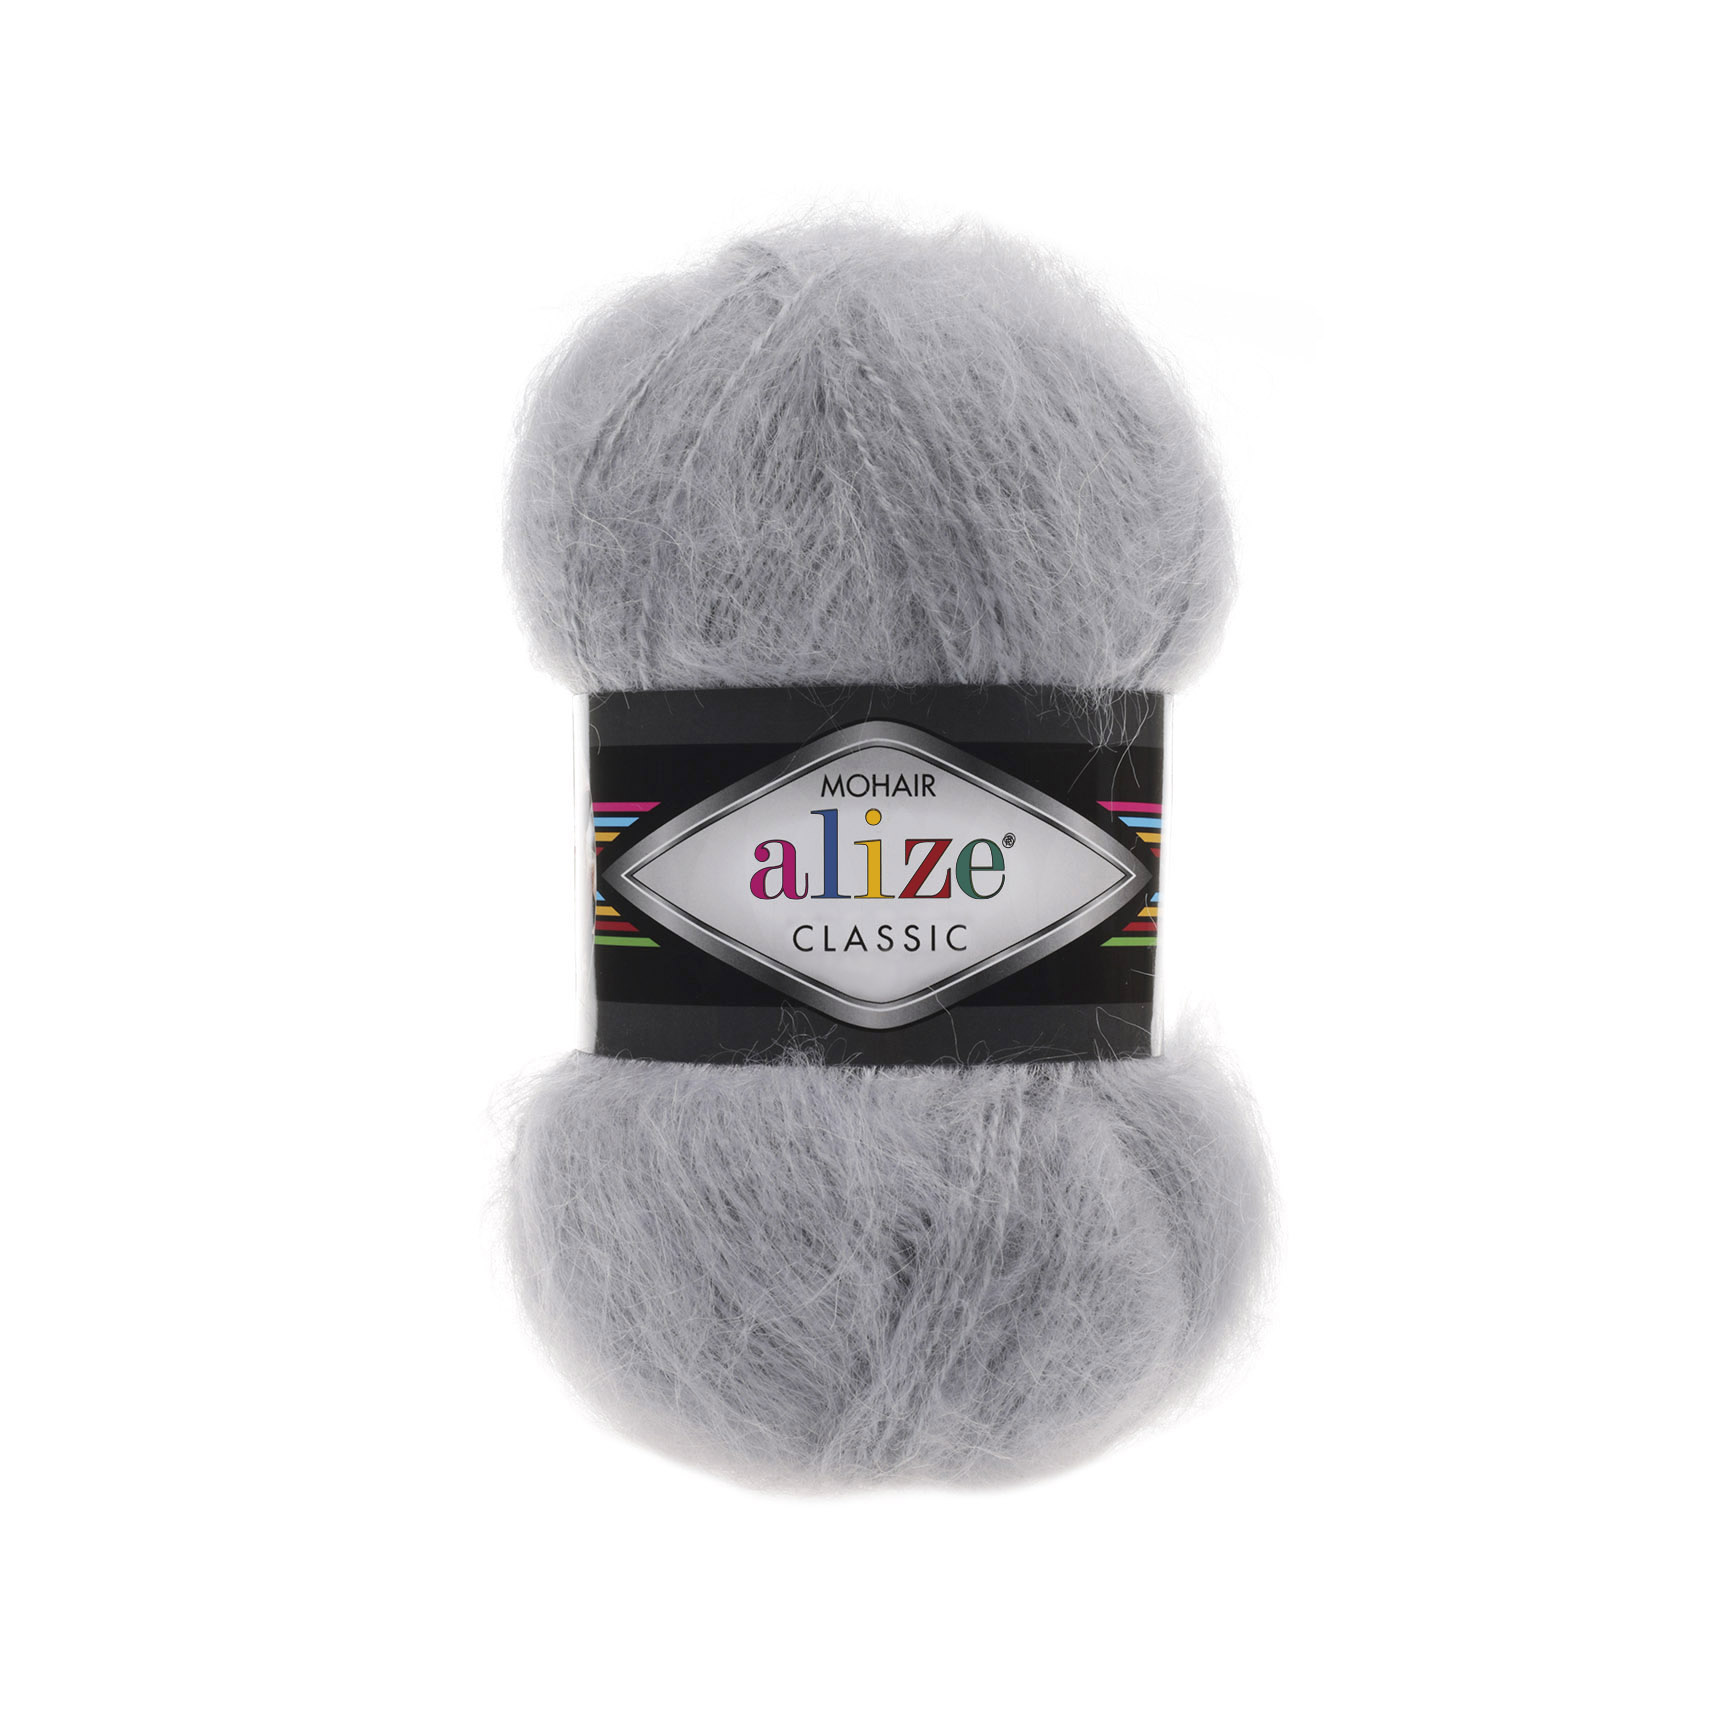 Alize Mohair Classic, 21